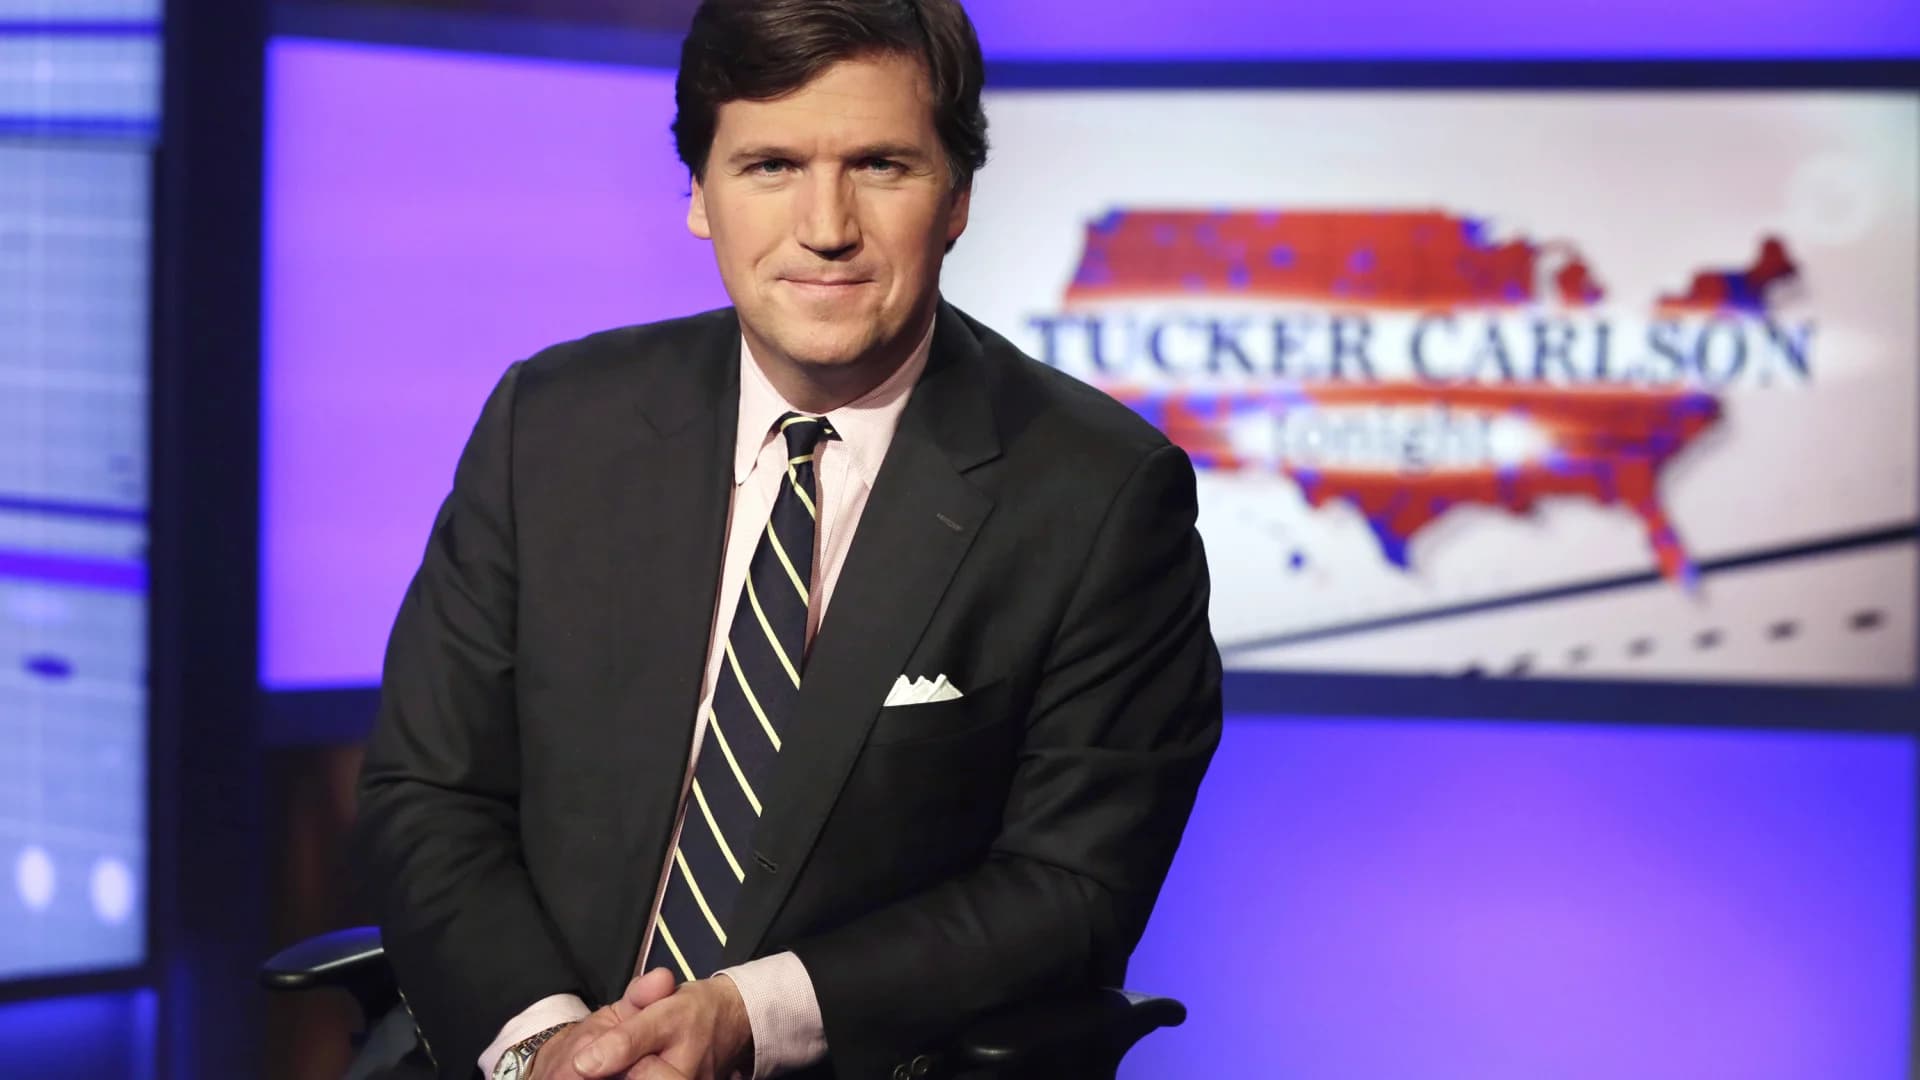 Tucker Carlson says he's coming back with show on Twitter